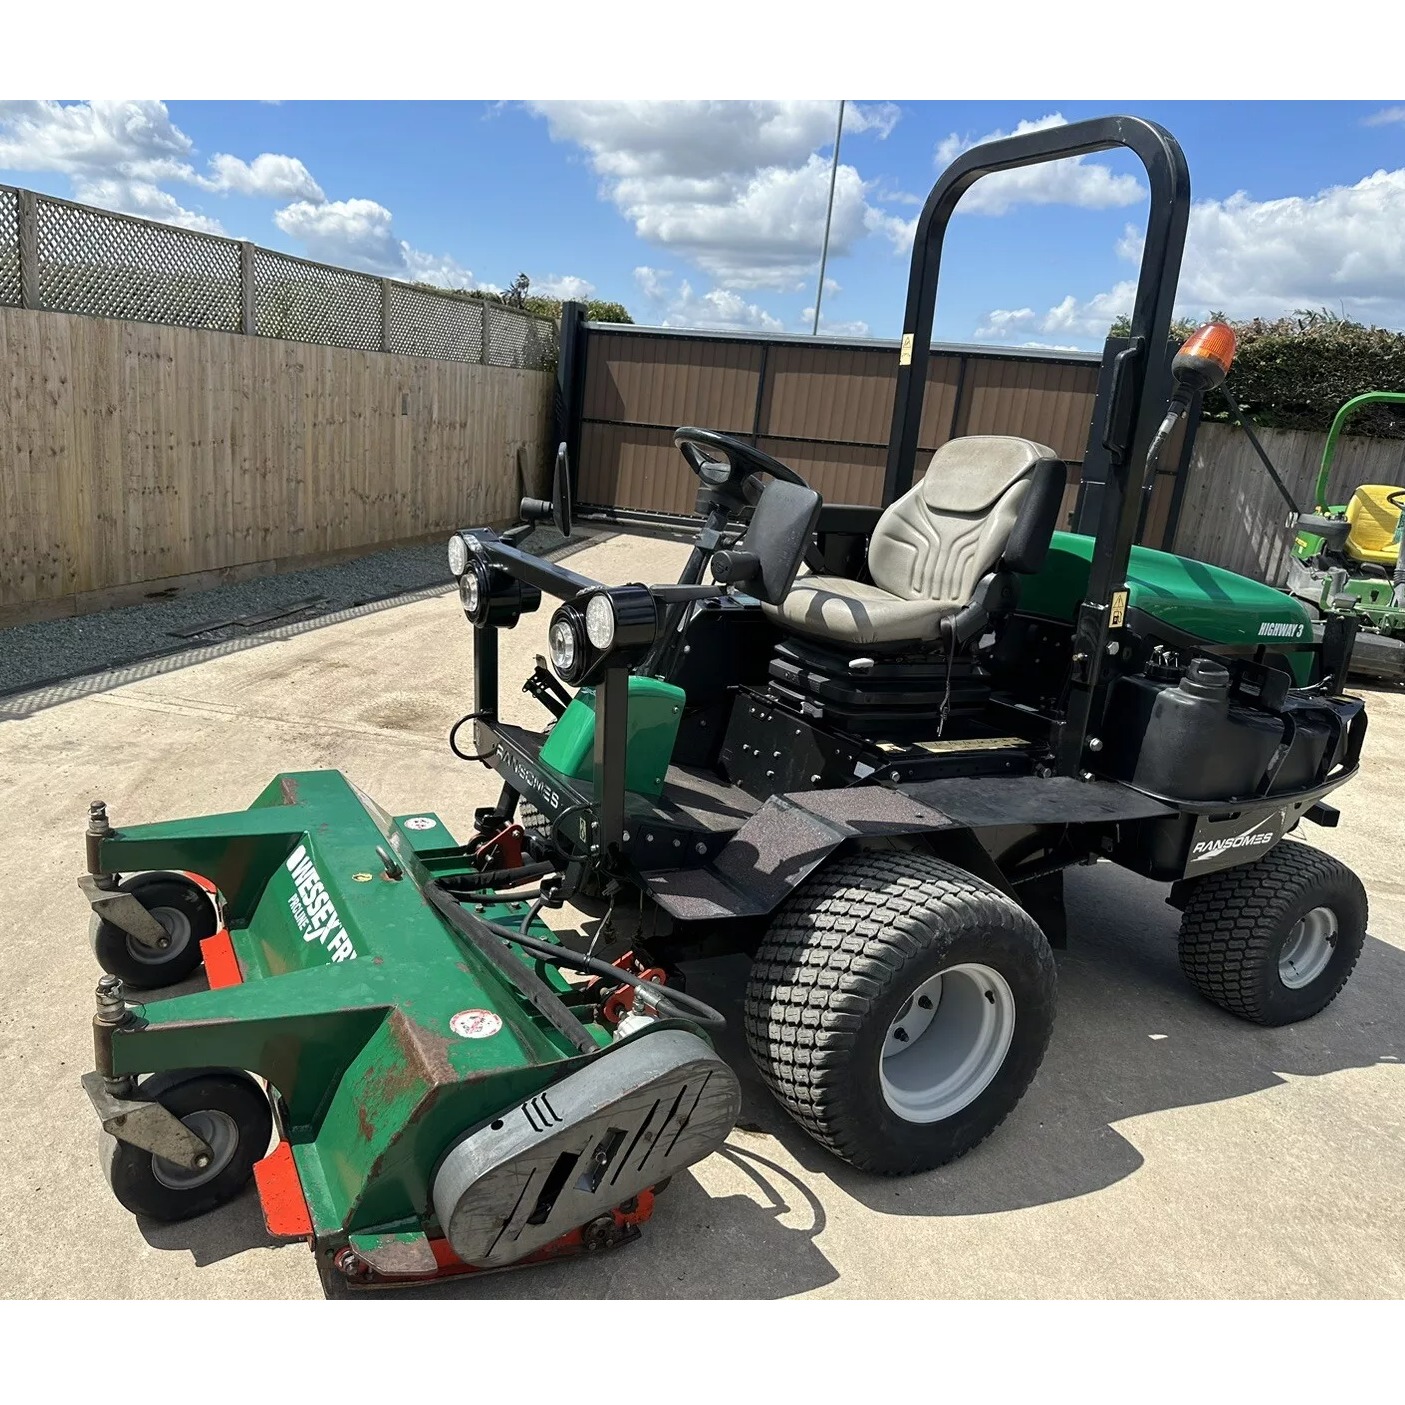 2018 RANSOMES HR300 OUTFRONT WESSEX FLAIL DIESEL RIDE ON LAWN MOWER